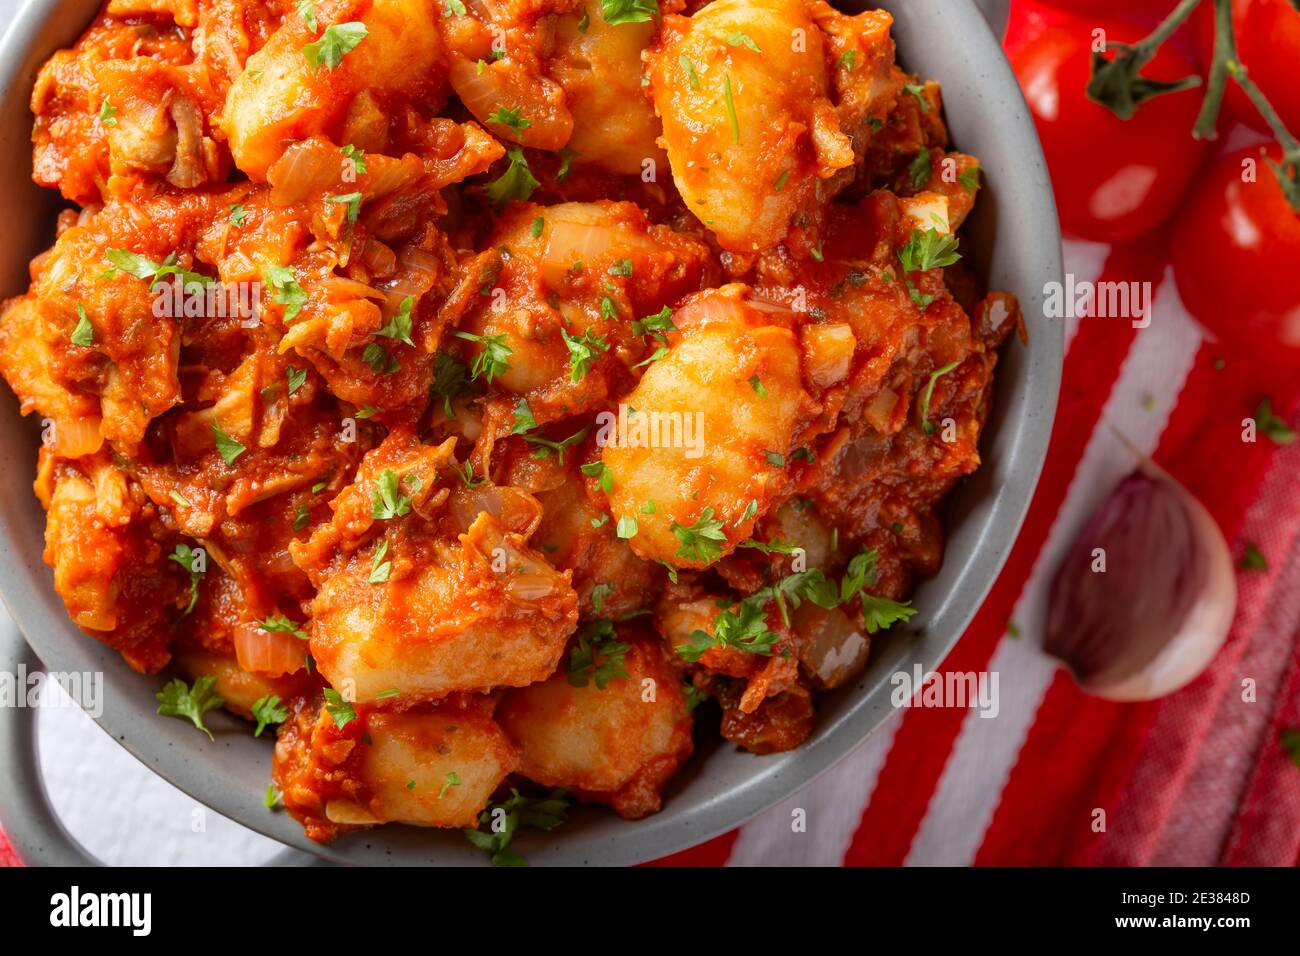 Goulash stew - traditional Hungarian food with herbs - top view Stock Photo